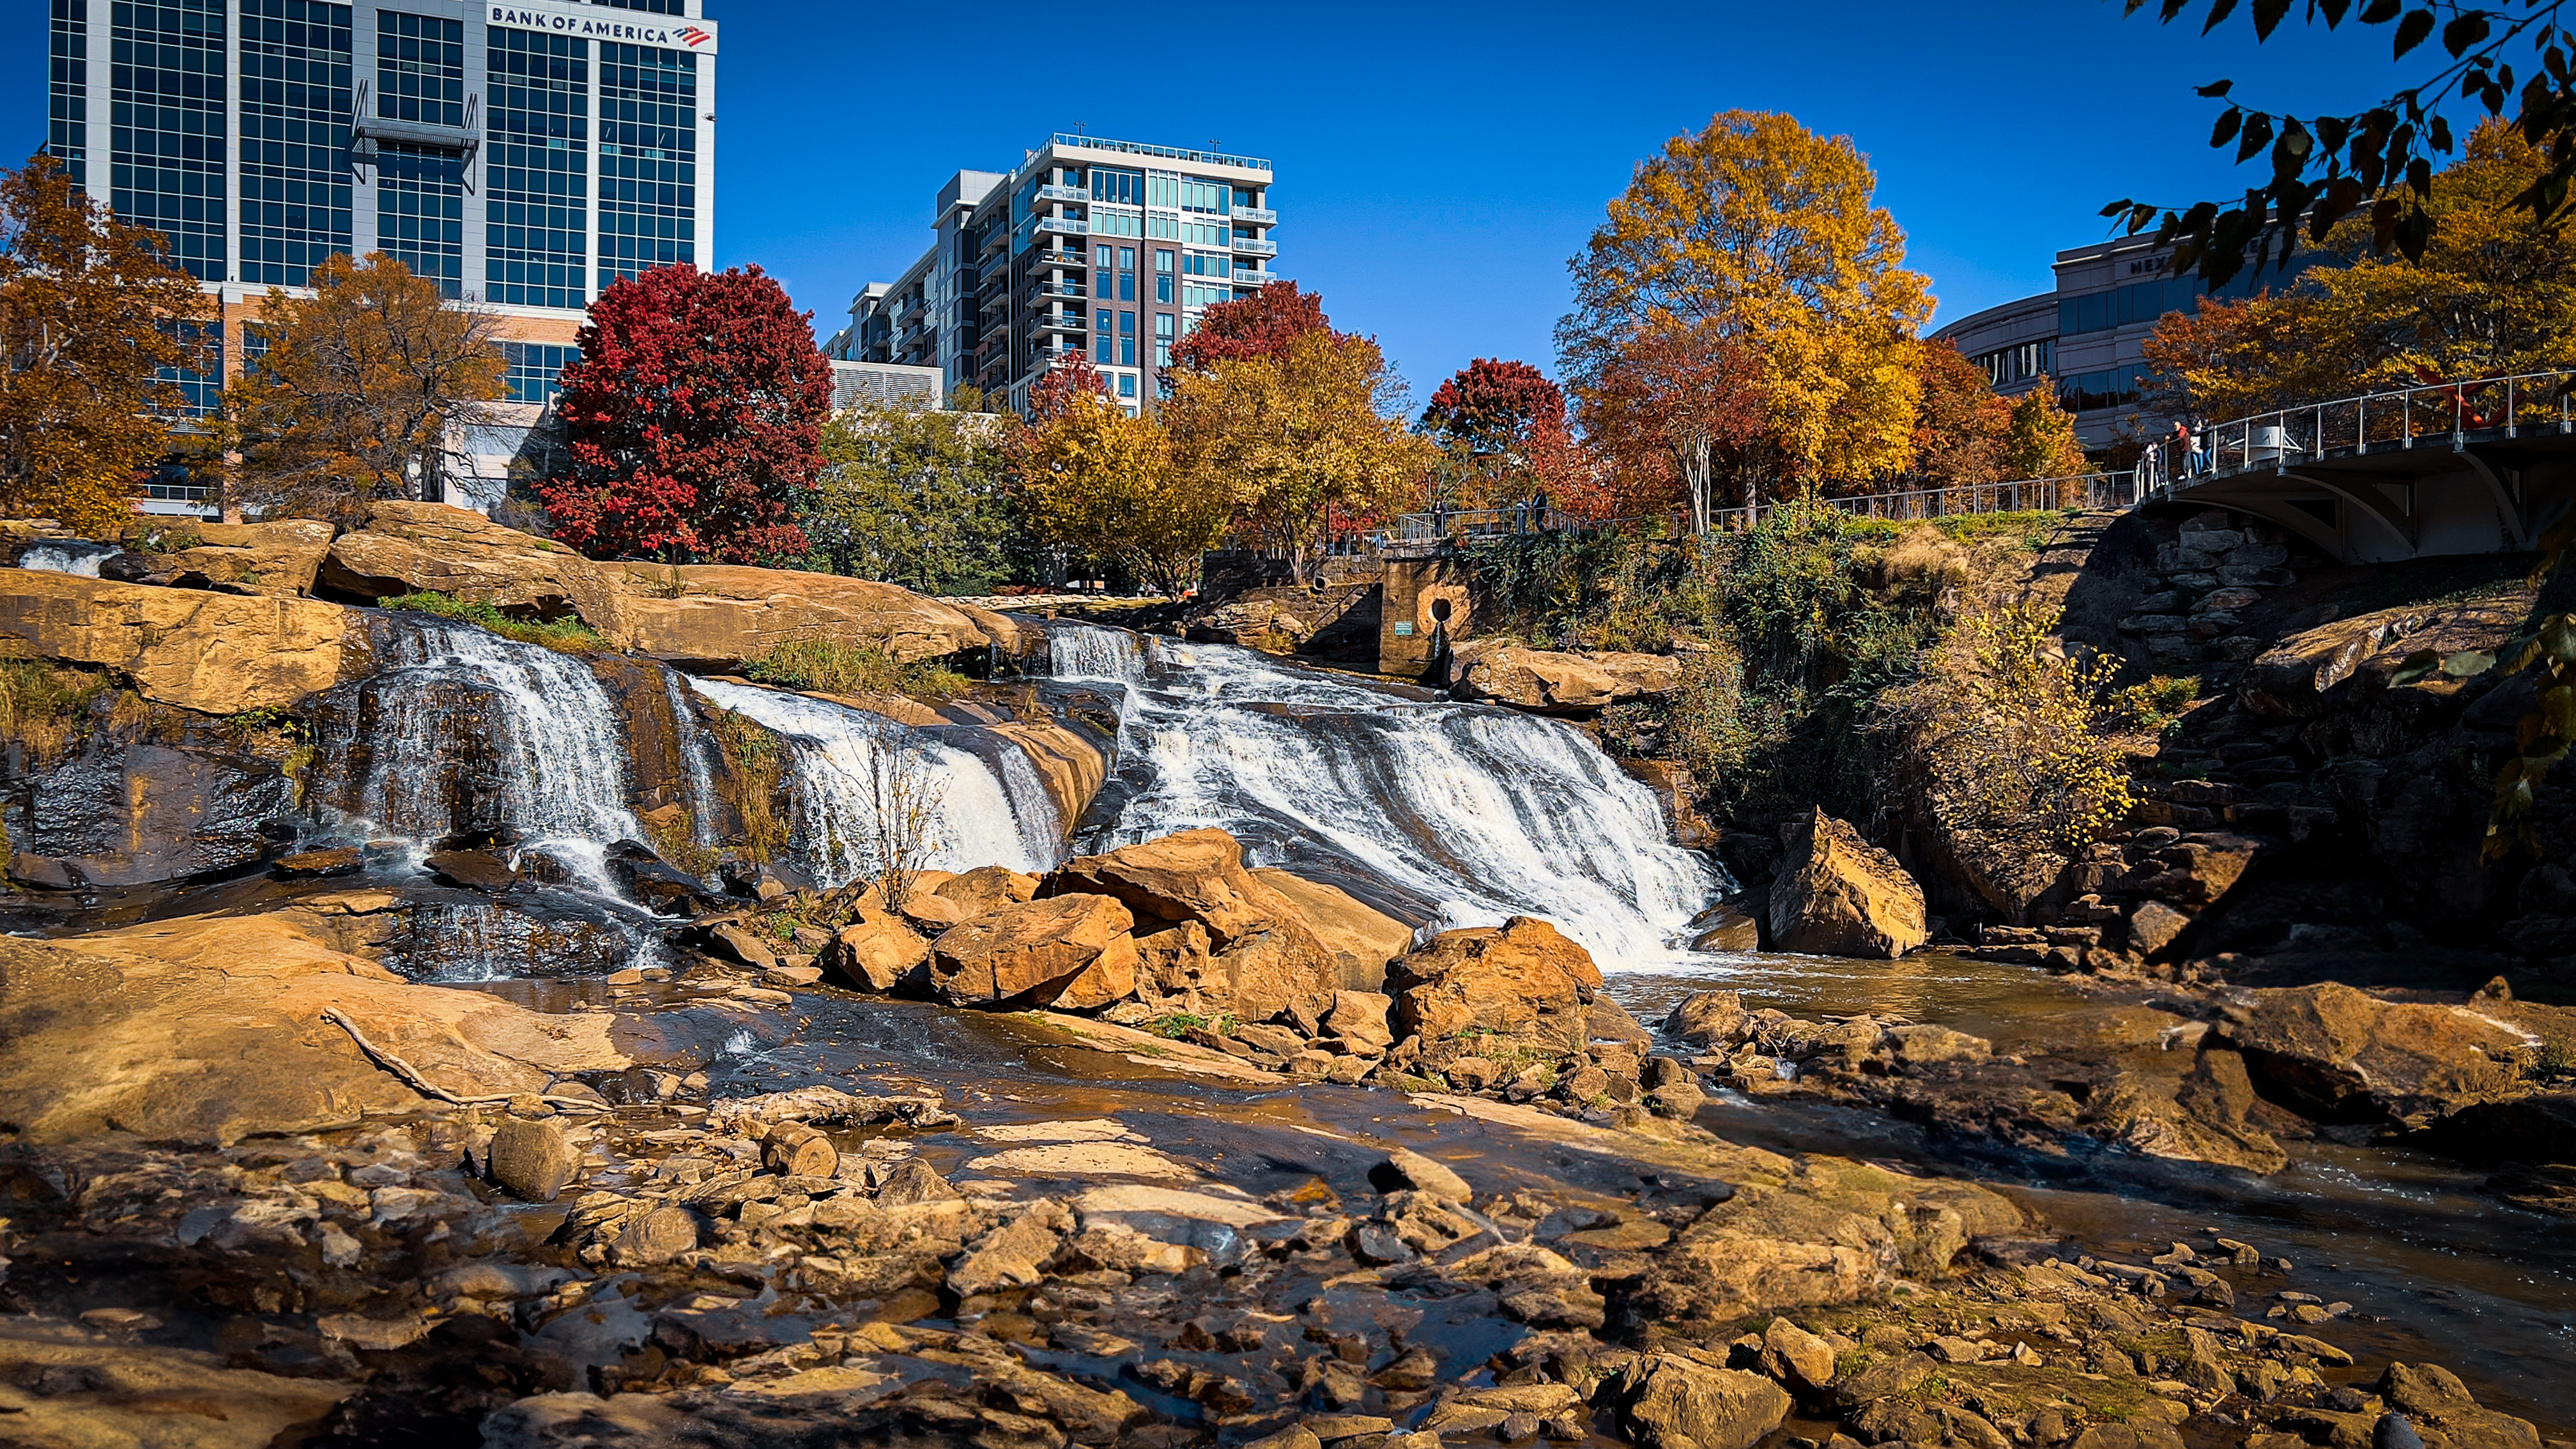 Water falls over brown rocks in Greenville, South Carolina's Reedy River. Trees on the ledge above the river display the bright red and yellow colors of fall. Office buildings in downtown Greenville tower in the background.